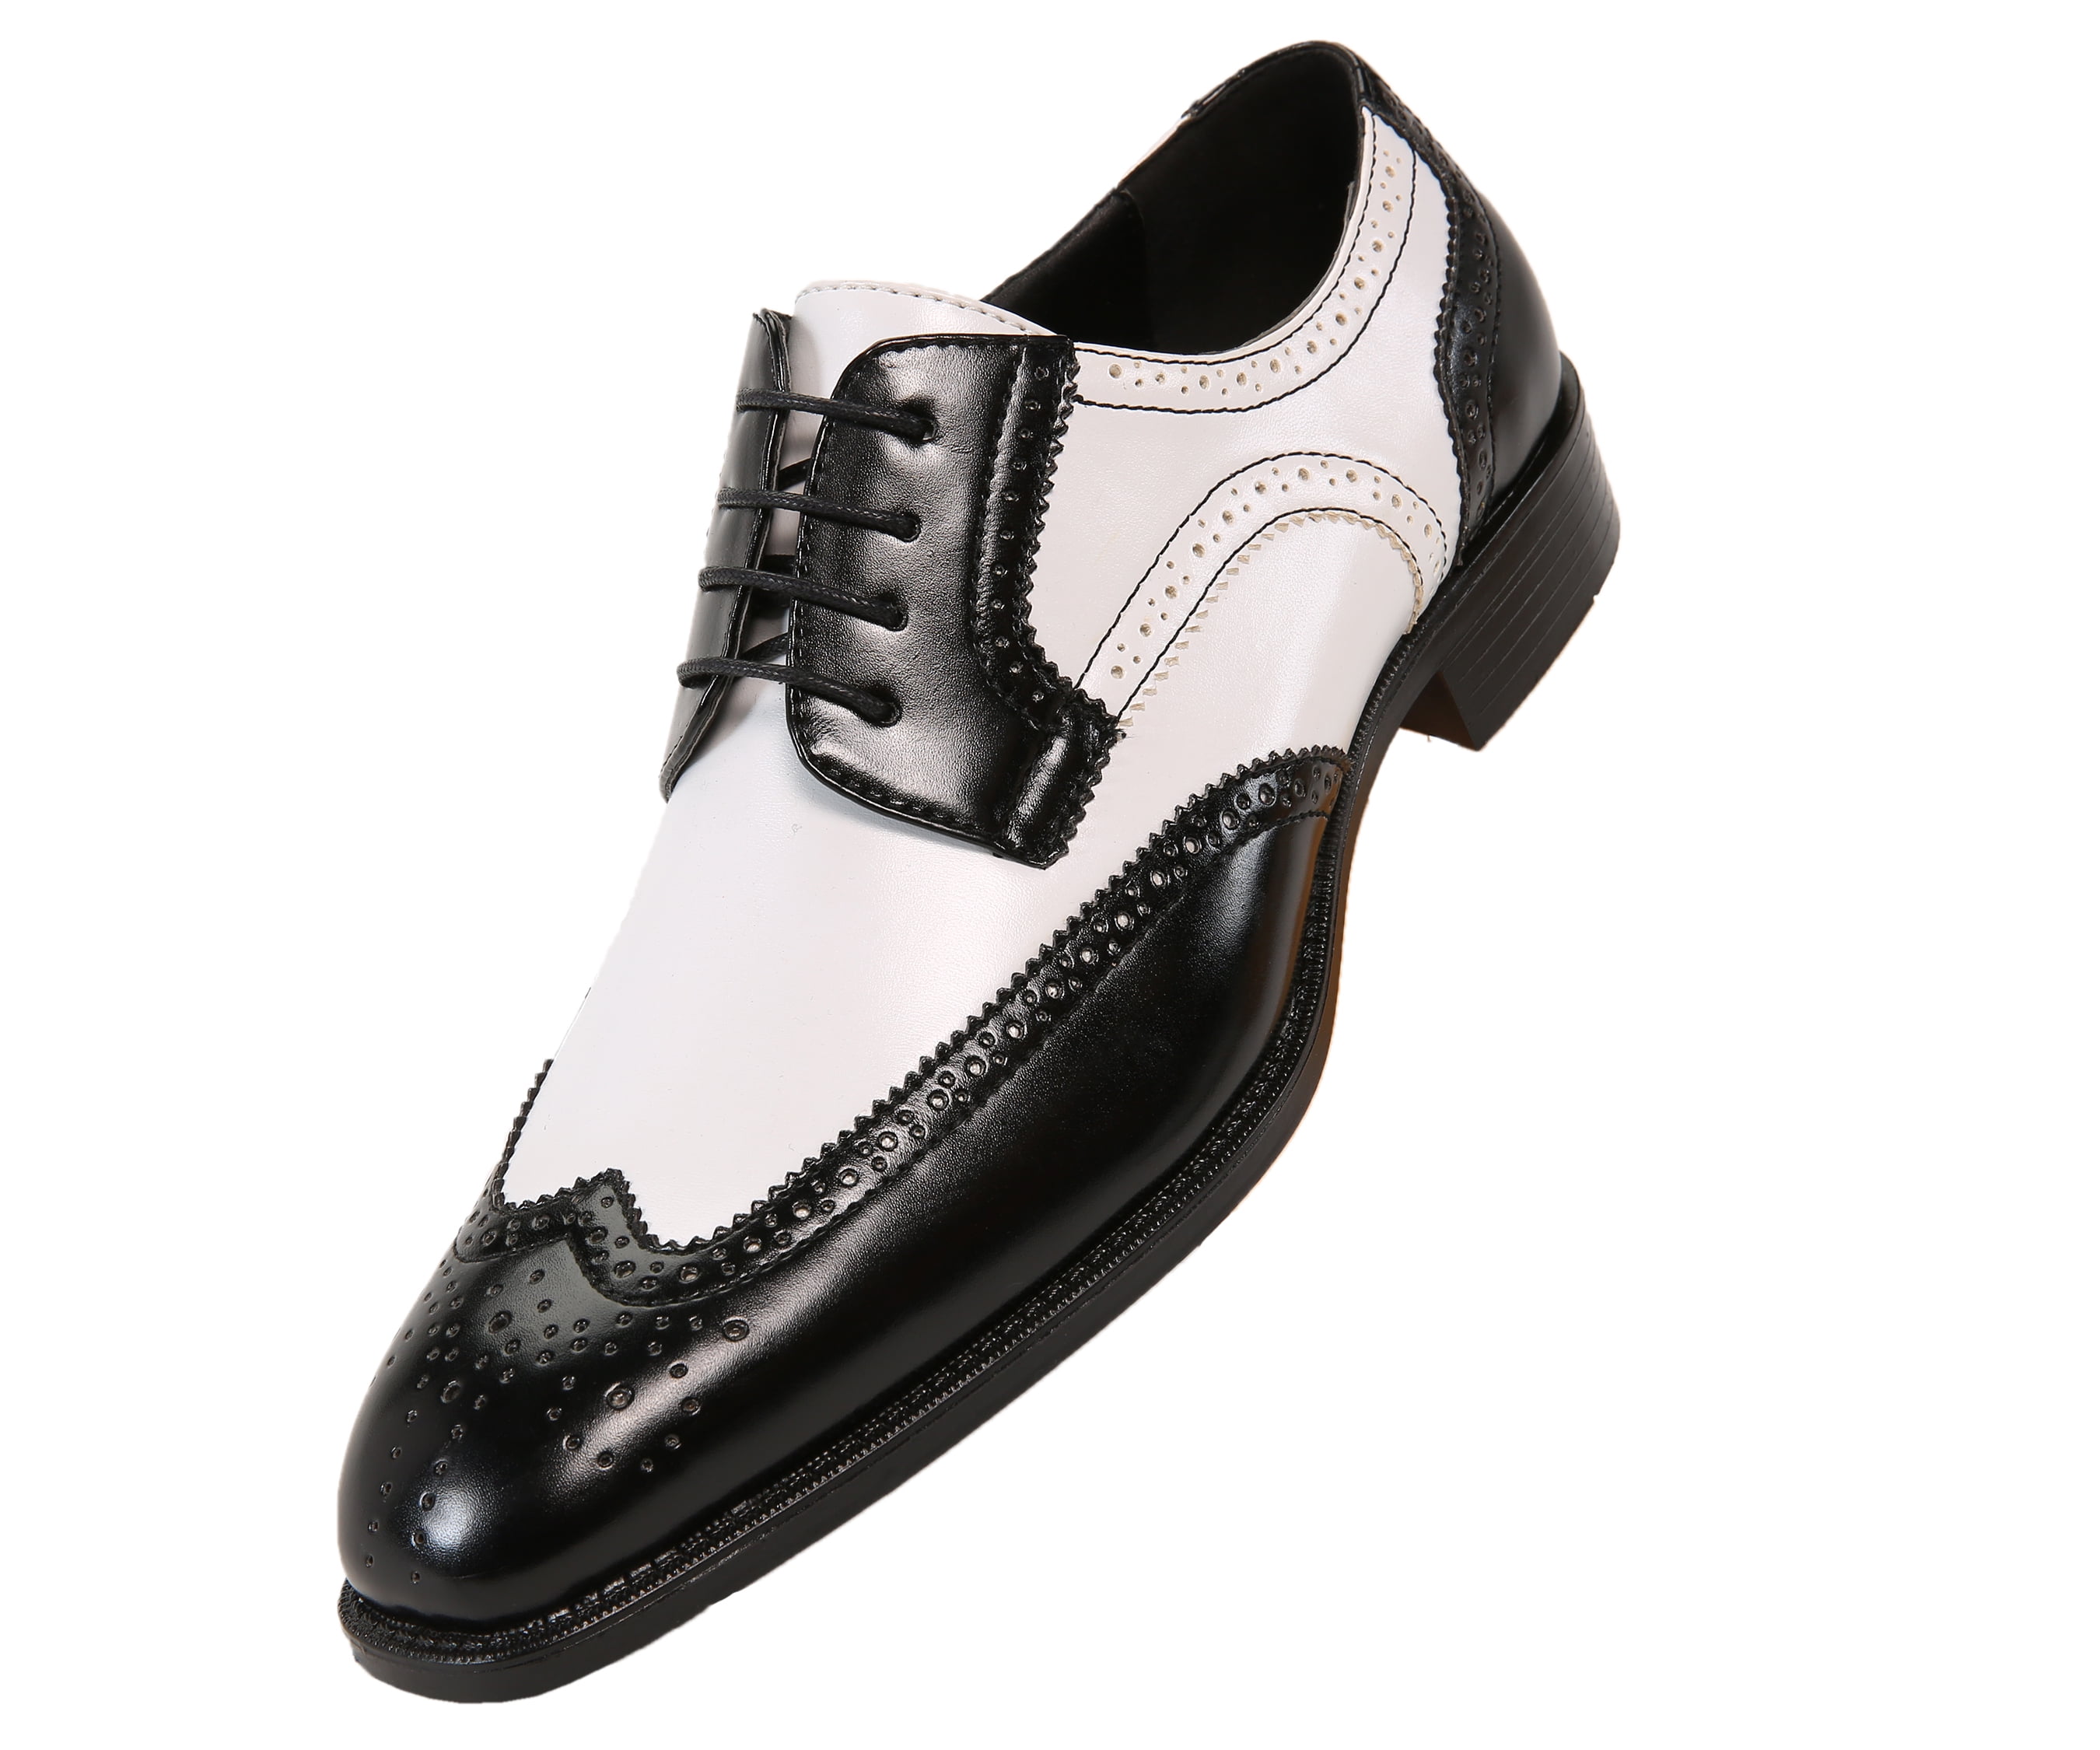 Two Tone Oxford Shoes